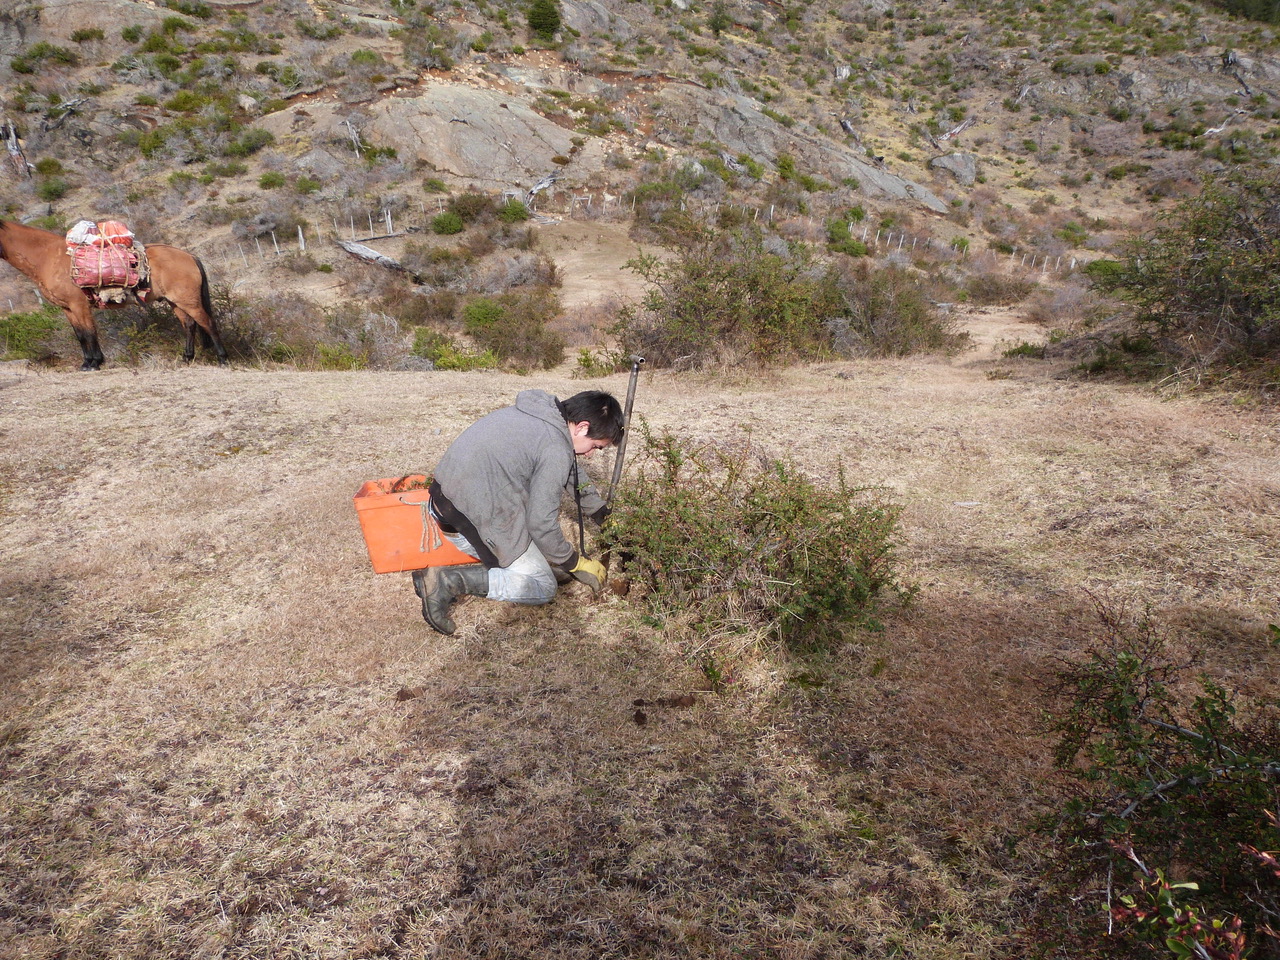 Ecosystem restoration project in a private (not “privately”) protected area in Chilean Patagonia